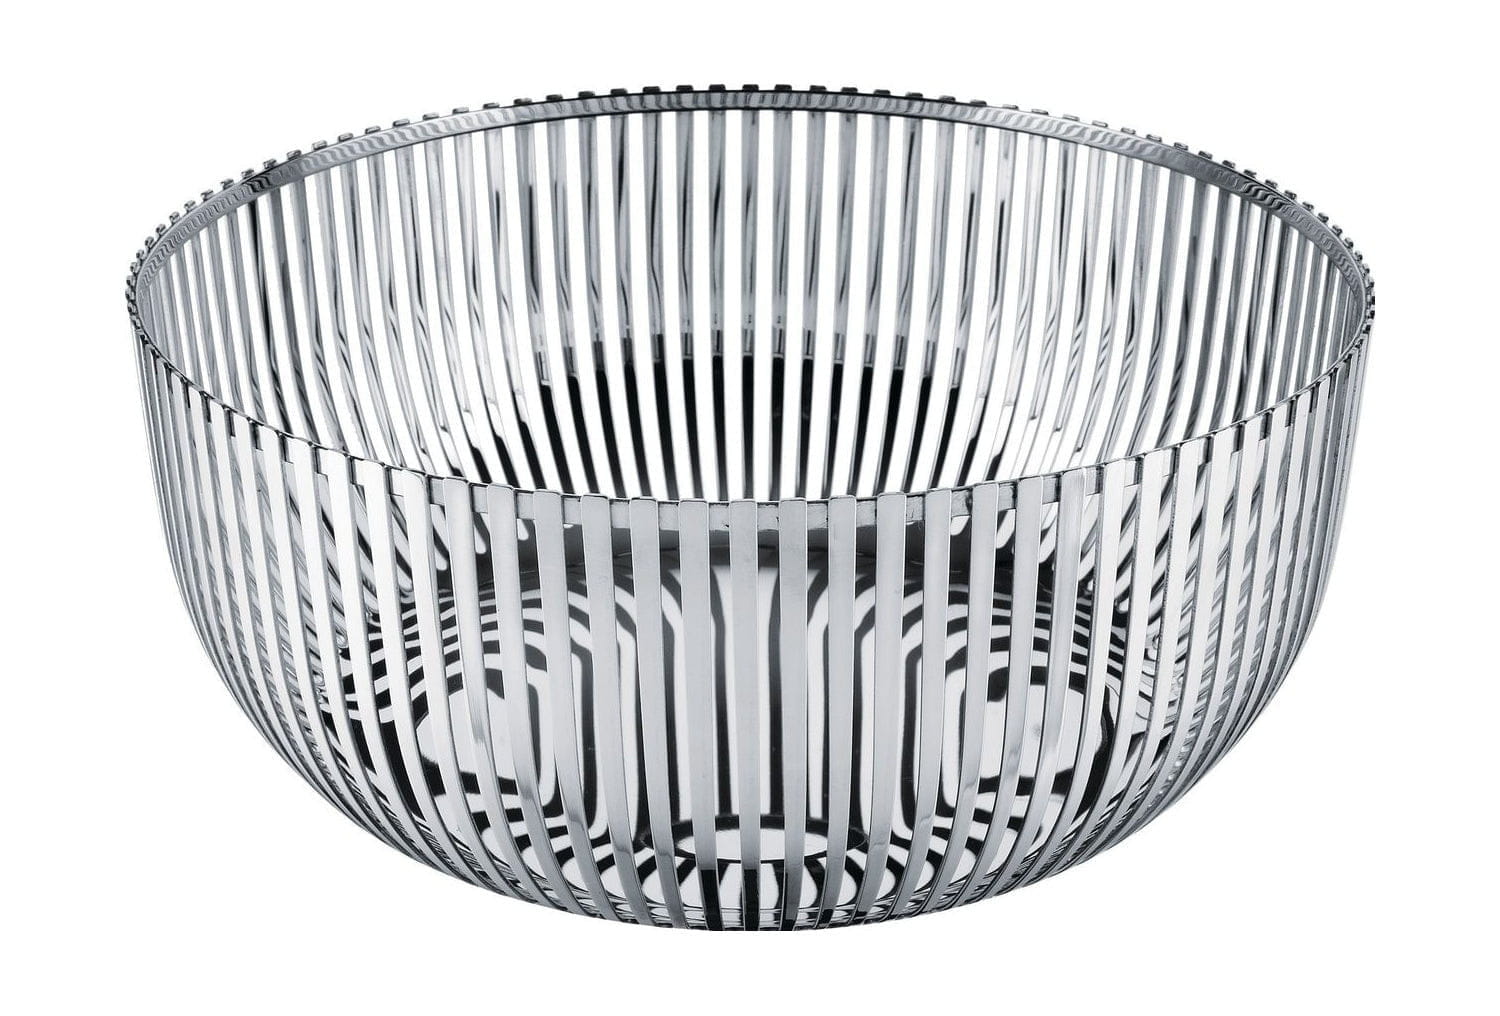 Alessi Pch05 Fruit Bowl Made Of Stainless Steel, ø24 Cm